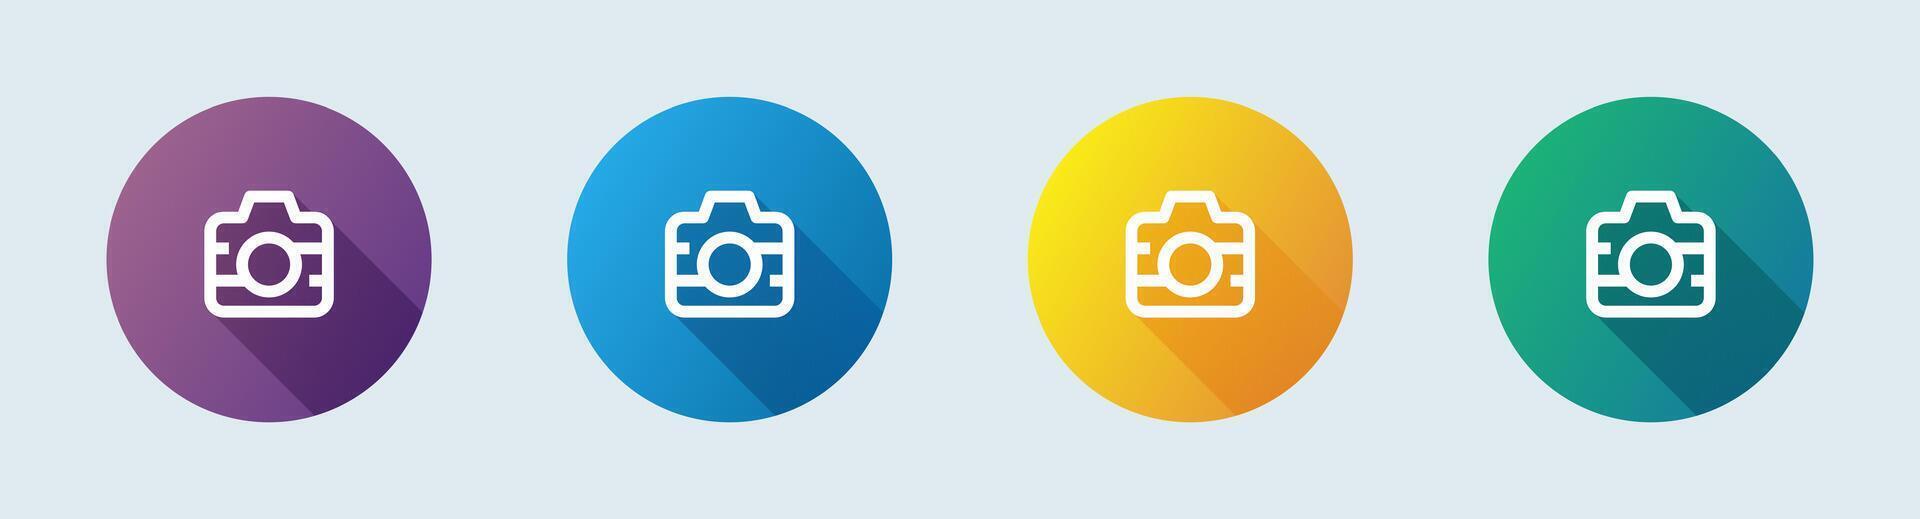 Camera line icon in flat design style. Capture buttons signs illustration. vector